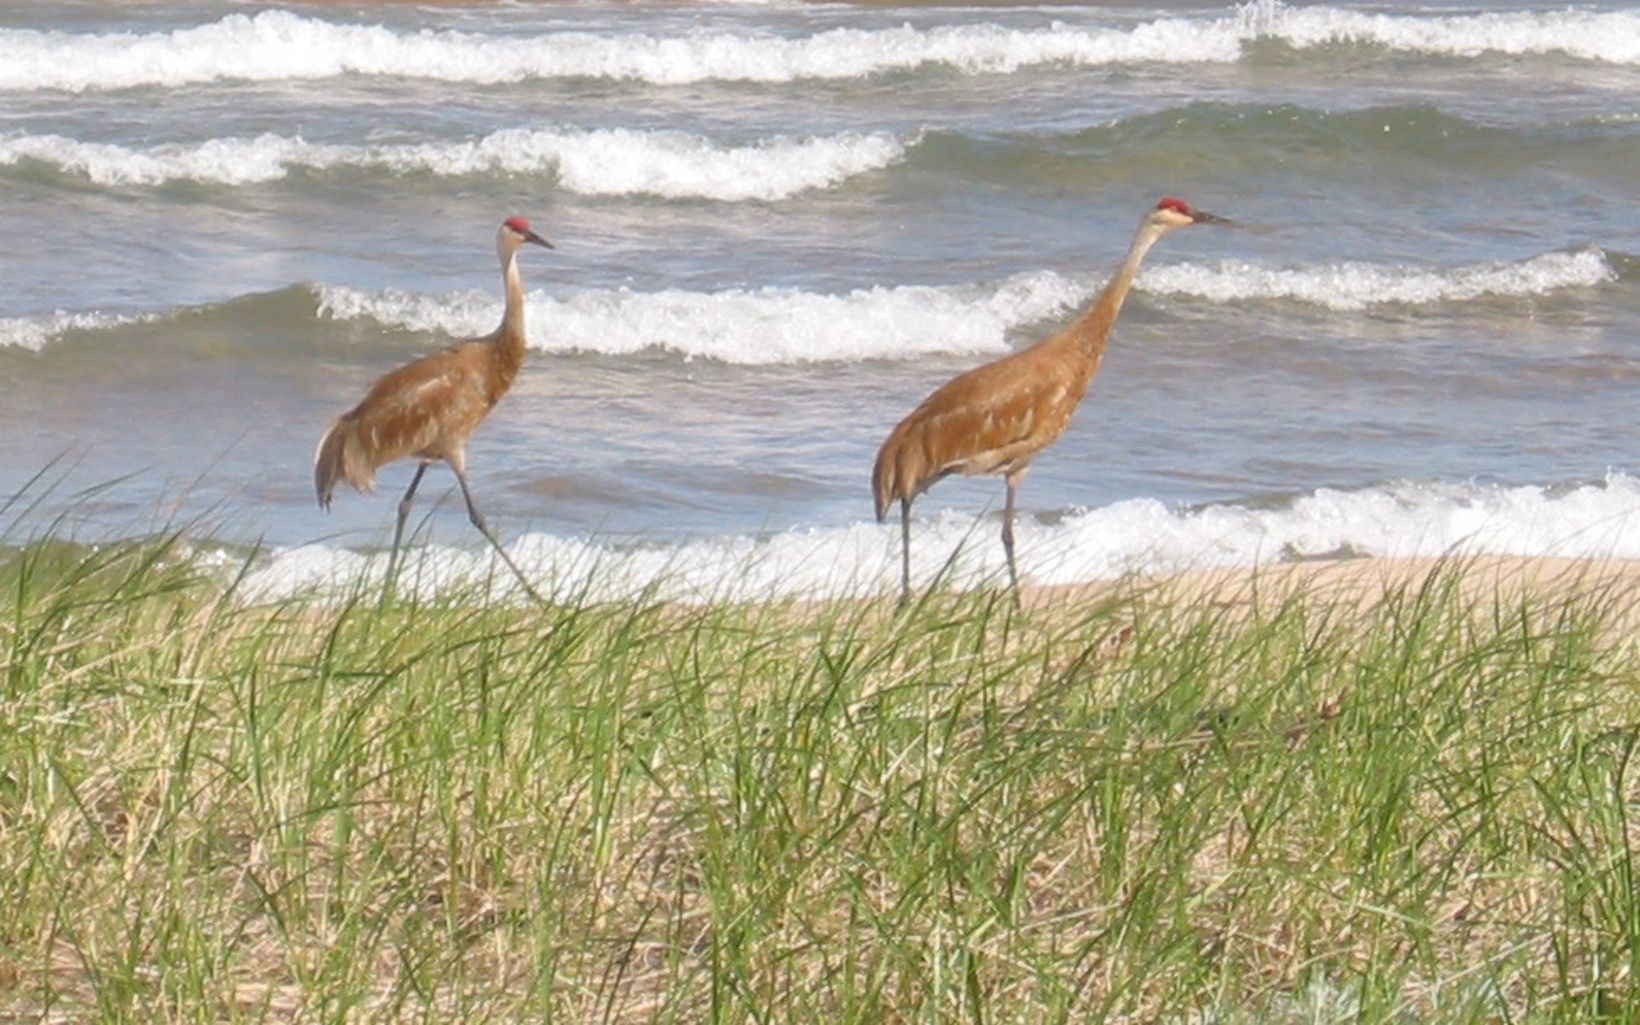 Two sandhill cranes stand along a grass and sand-covered lake shoreline.